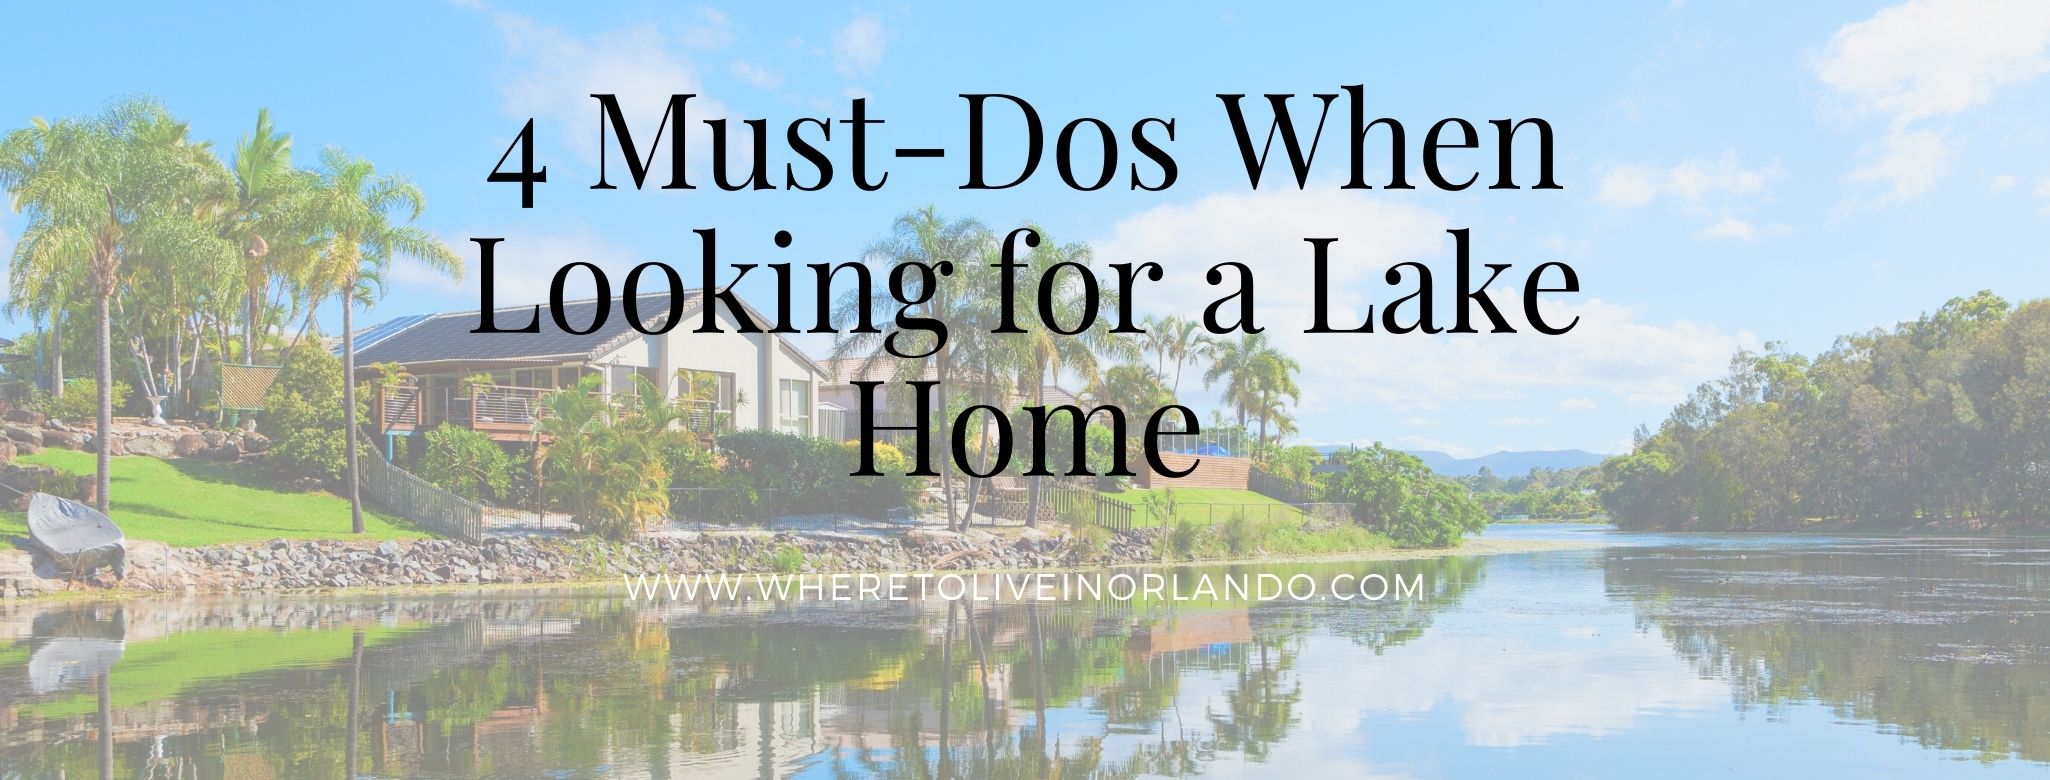 4 Must-Dos When Looking for a Lake Home